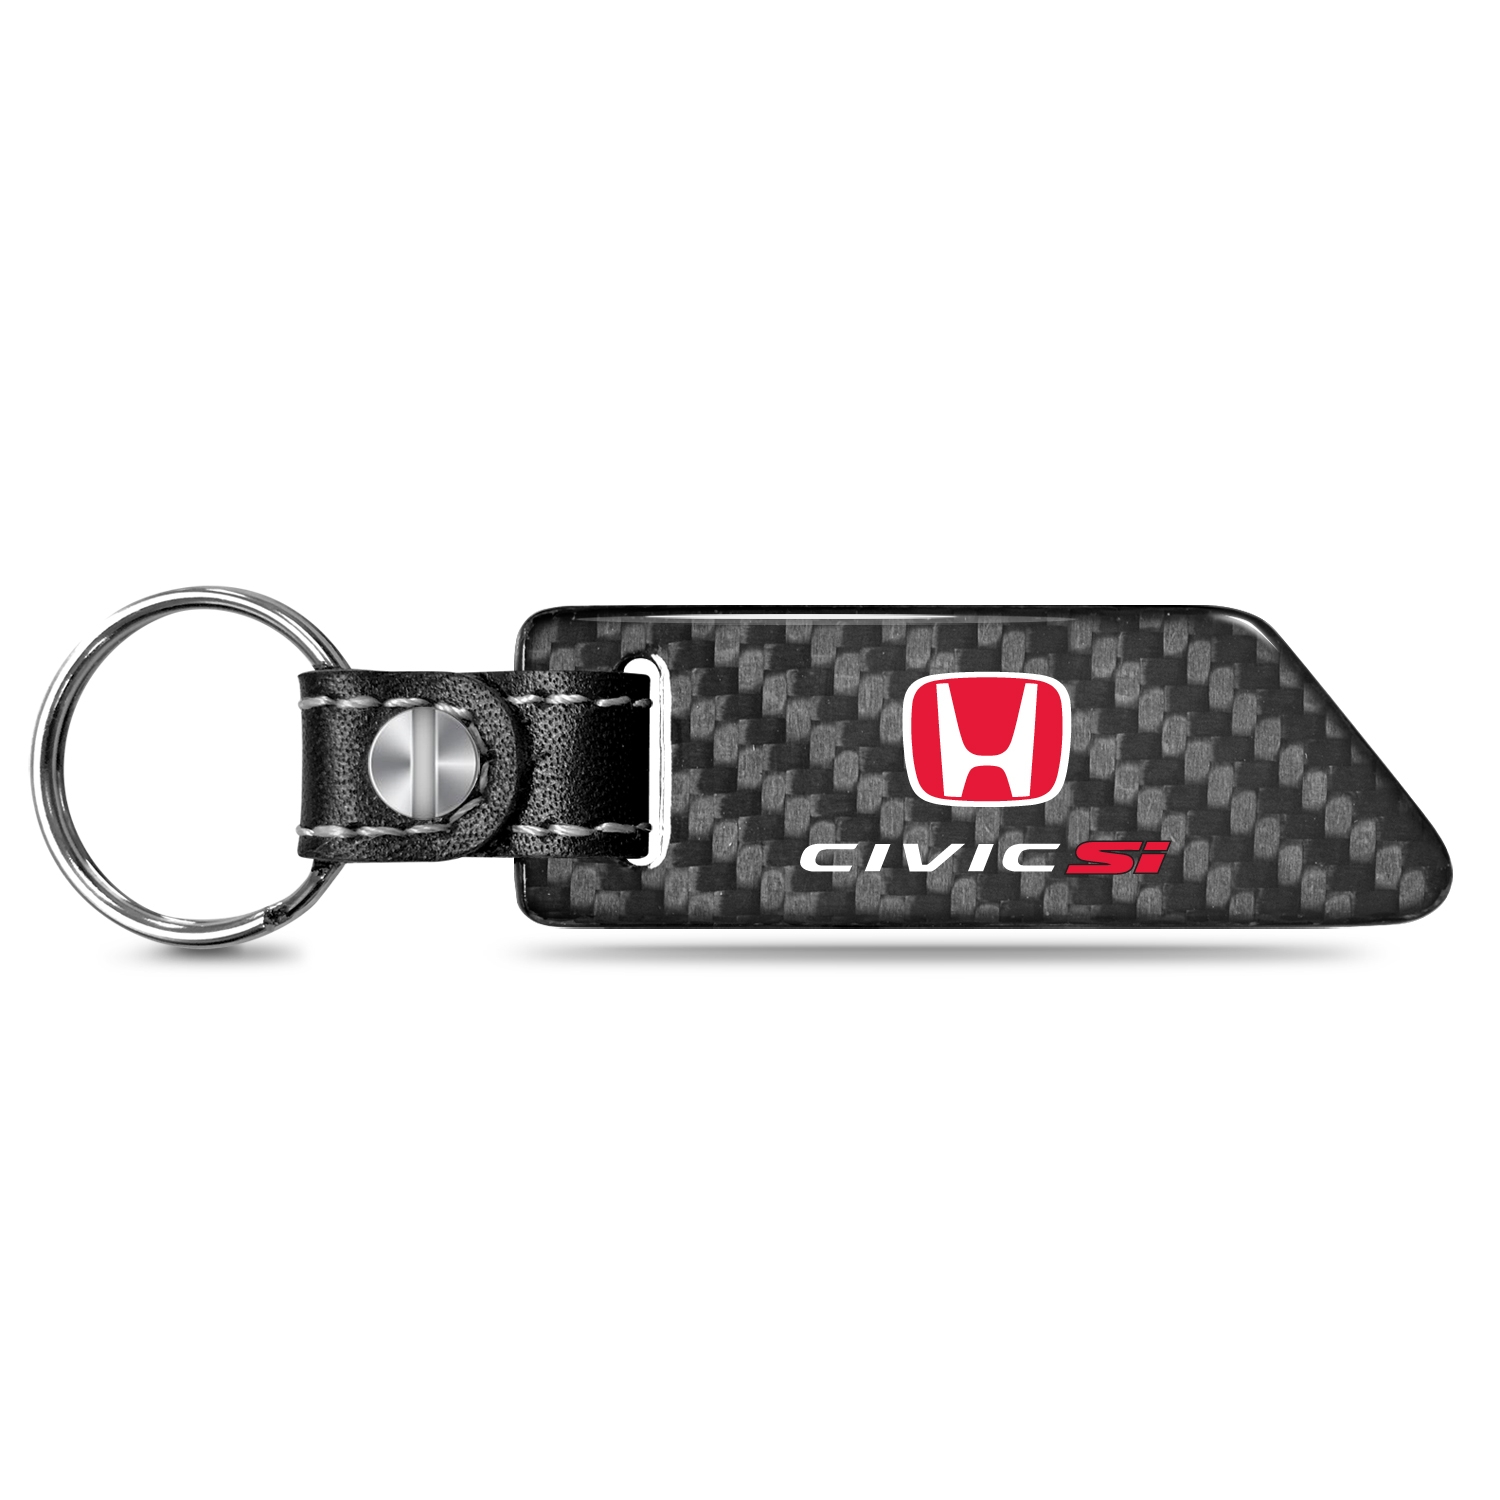 Honda Civic Si Red Logo Real Carbon Fiber Blade Style with Black Leather Strap Key Chain